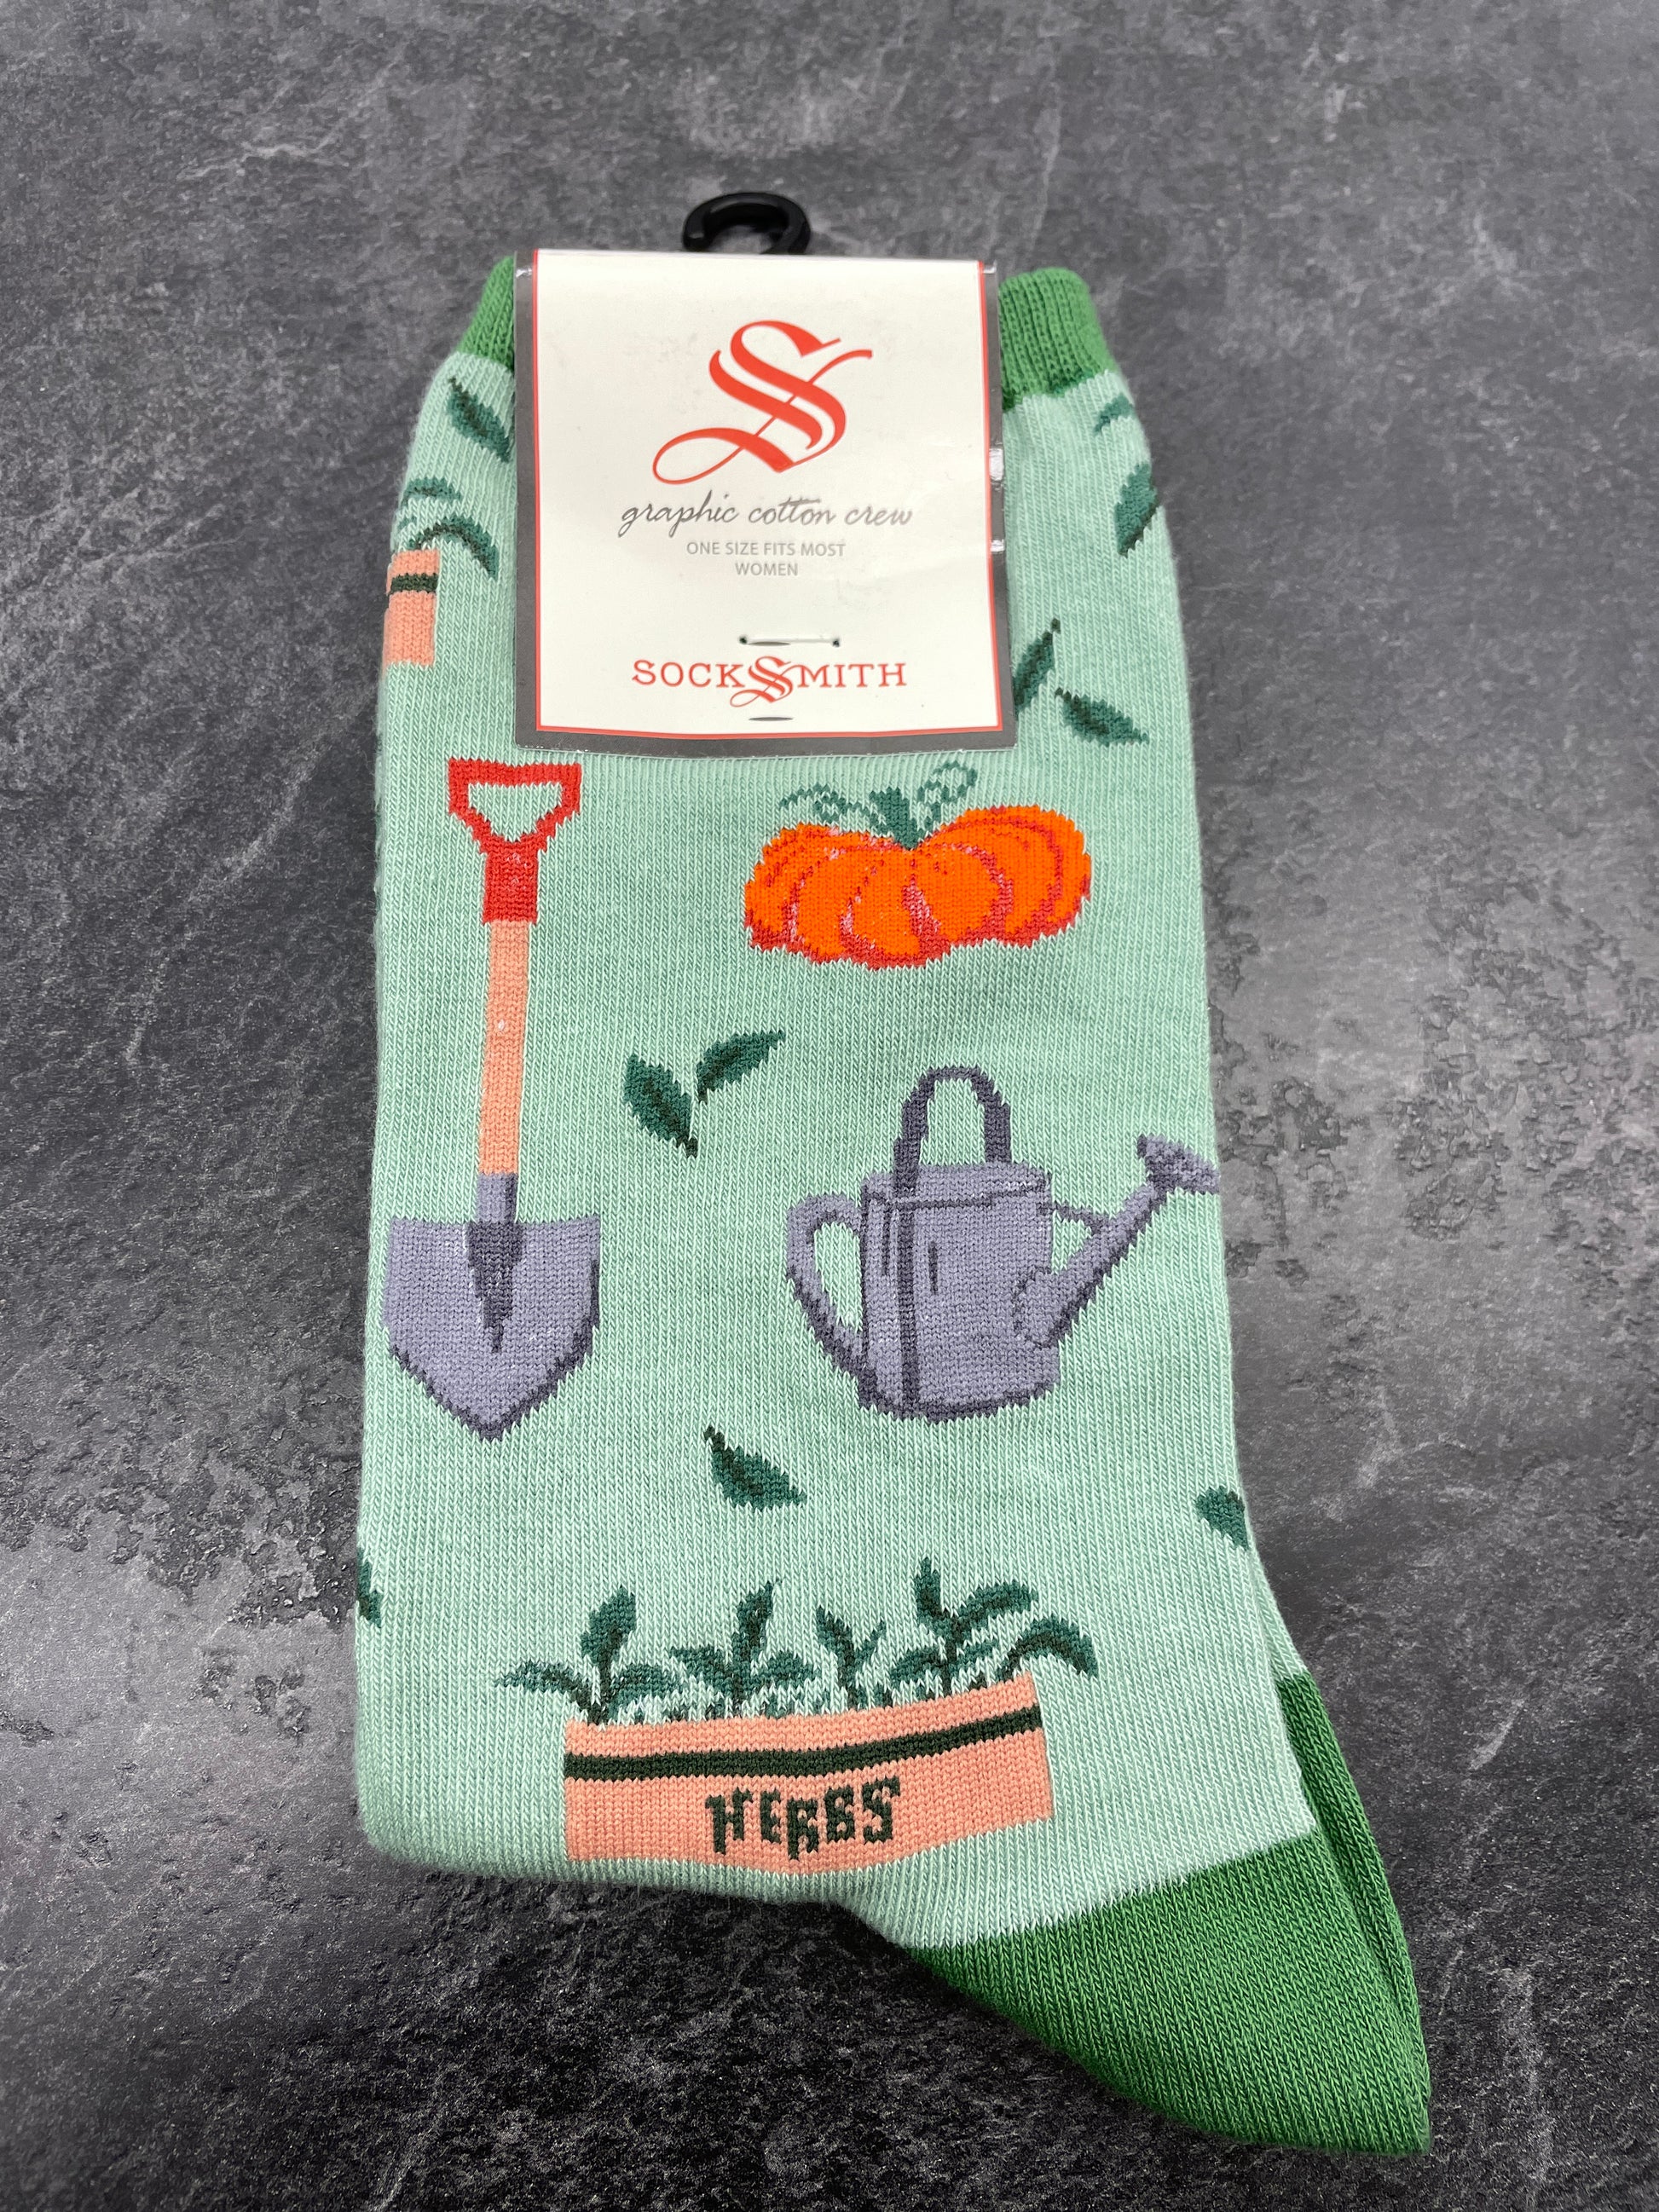 The happy gardener's sock has pictures of a shovel, watering can, herbs in a planter box, pumpkin and leaves. All on a light green background with green toe and heel. by Socksmith